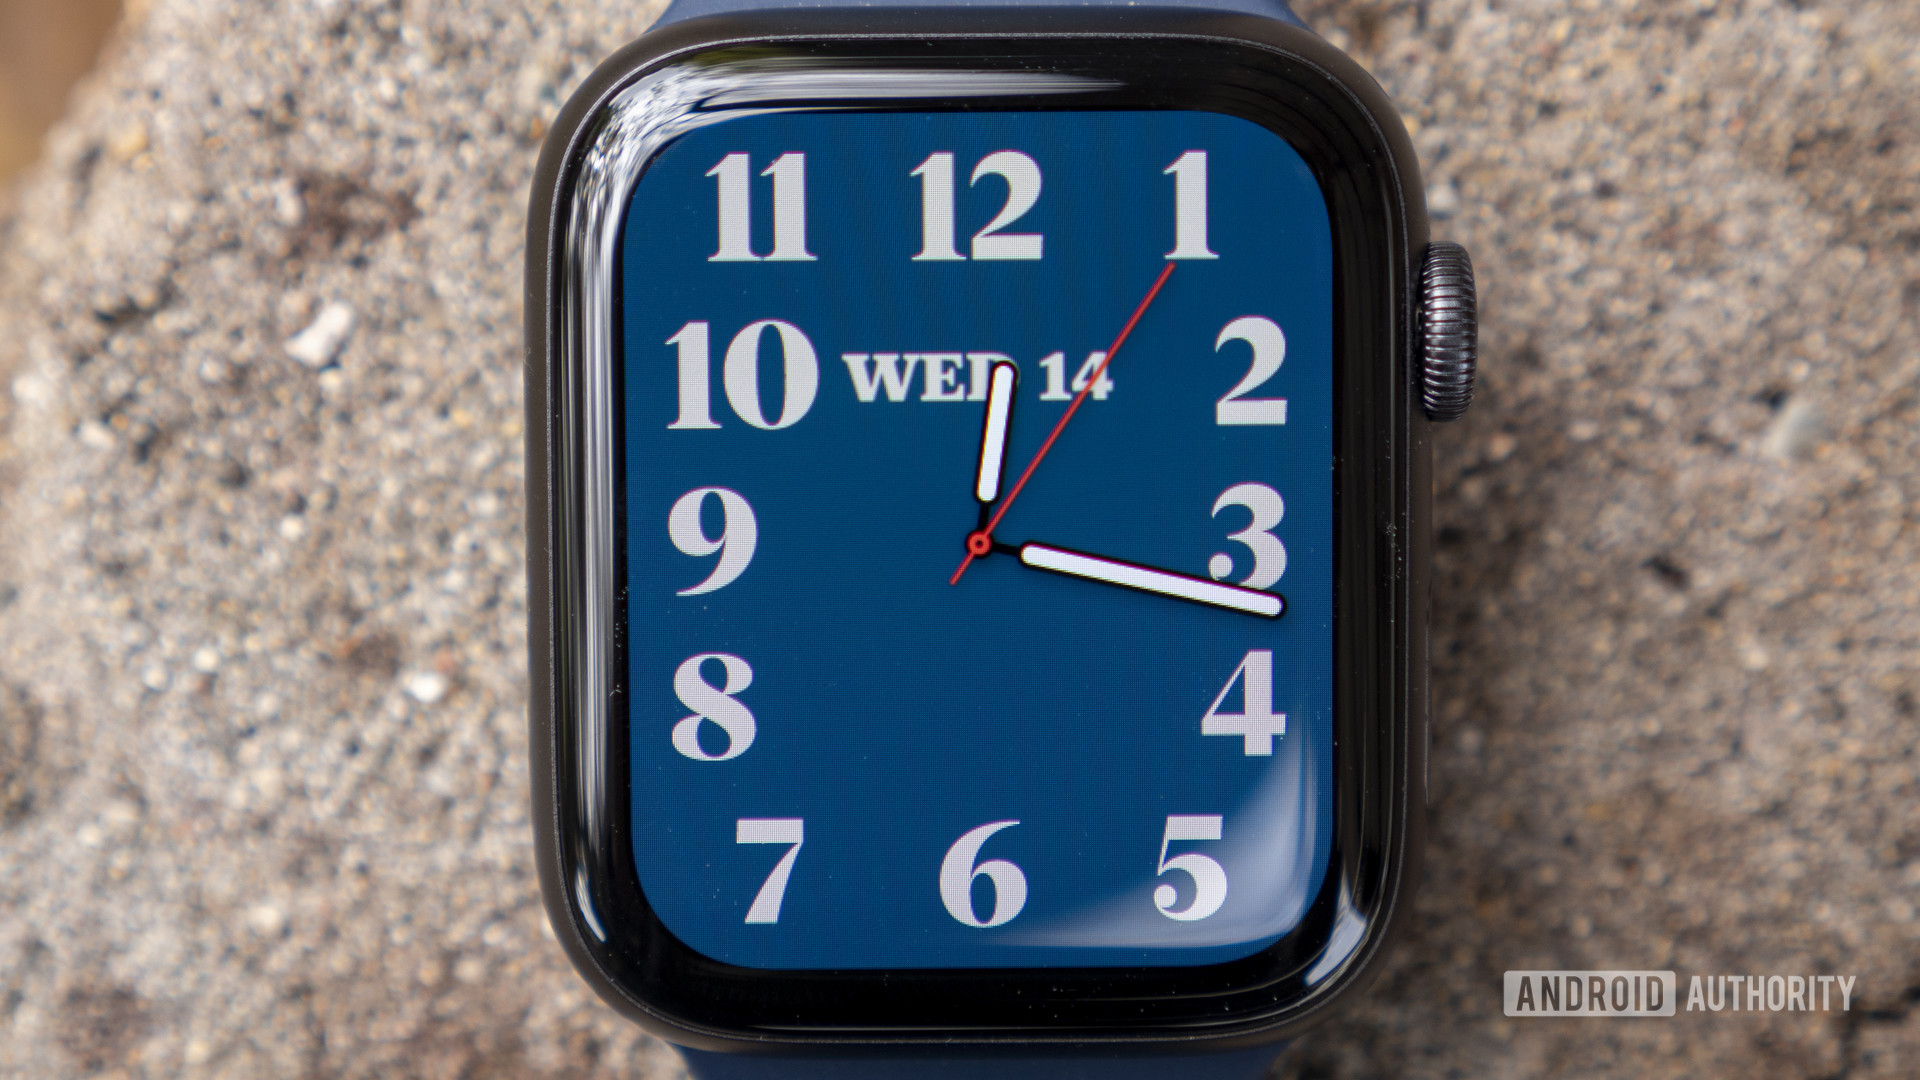 An Apple Watch rests on stone displaying a standard analog watch face